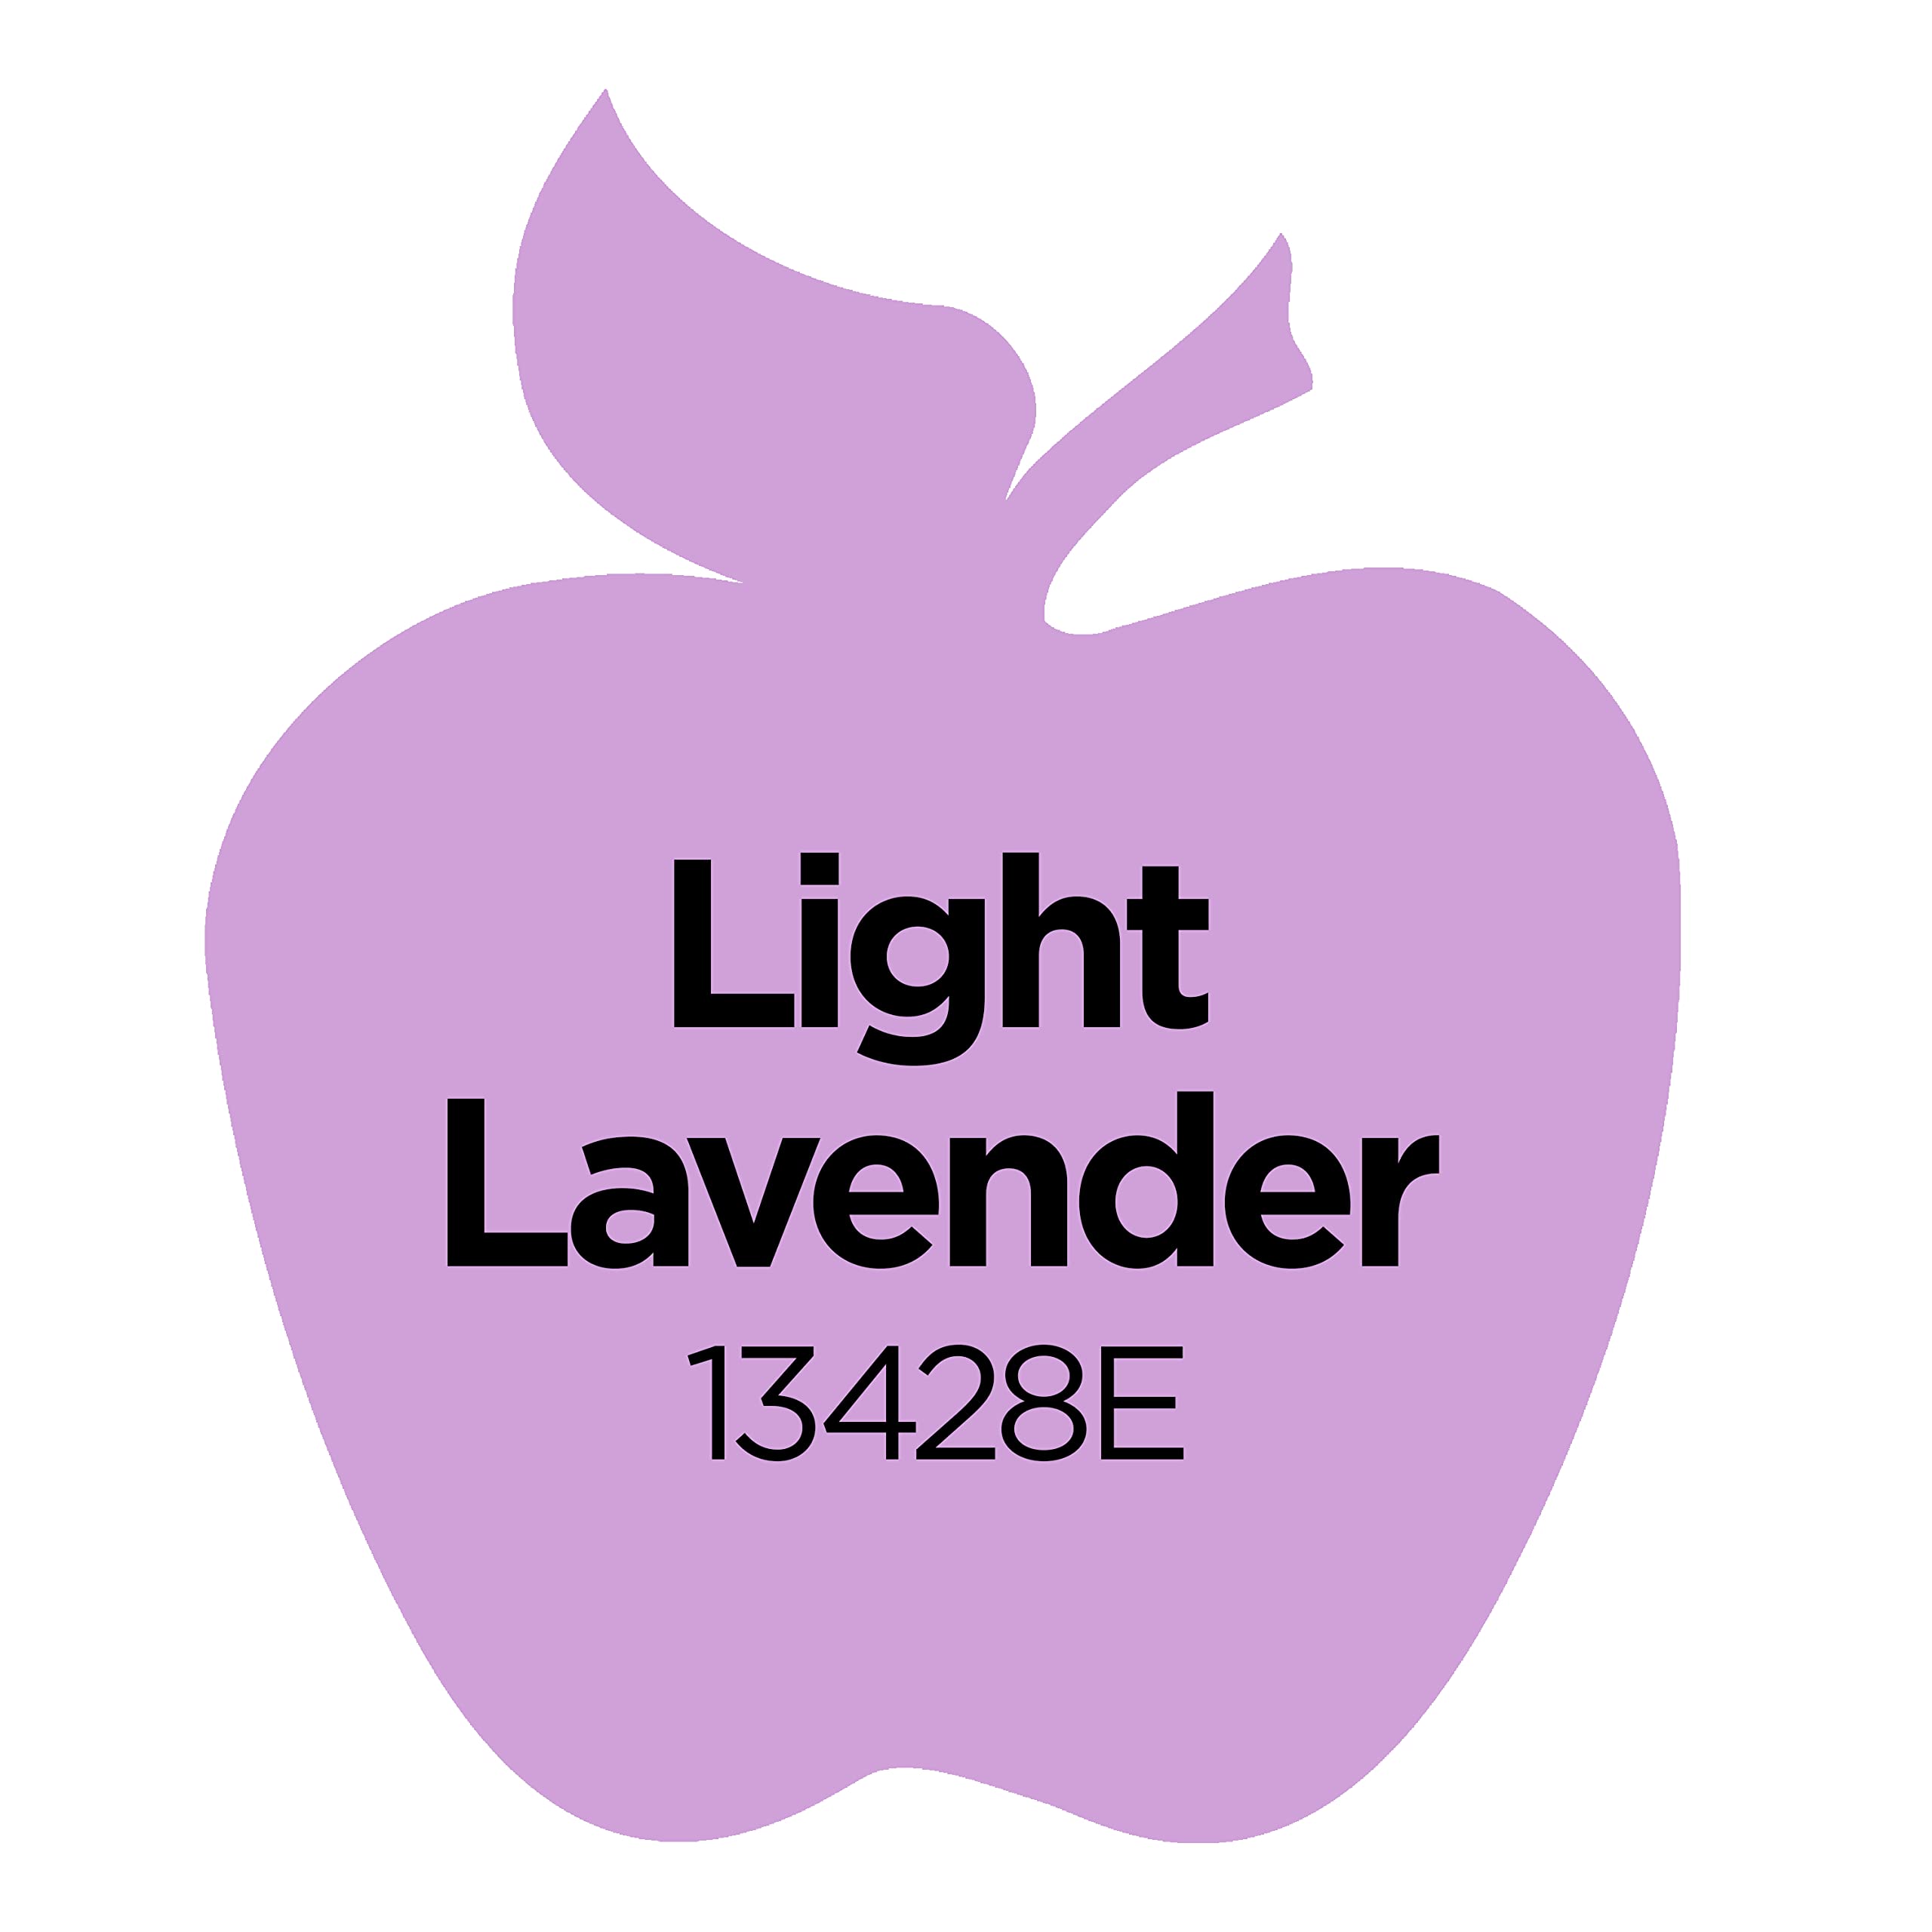 Apple Barrel Acrylic Paint, Light Lavender 2 fl oz Classic Matte Acrylic Paint For Easy To Apply DIY Arts And Crafts, Art Supplies With A Matte Finish